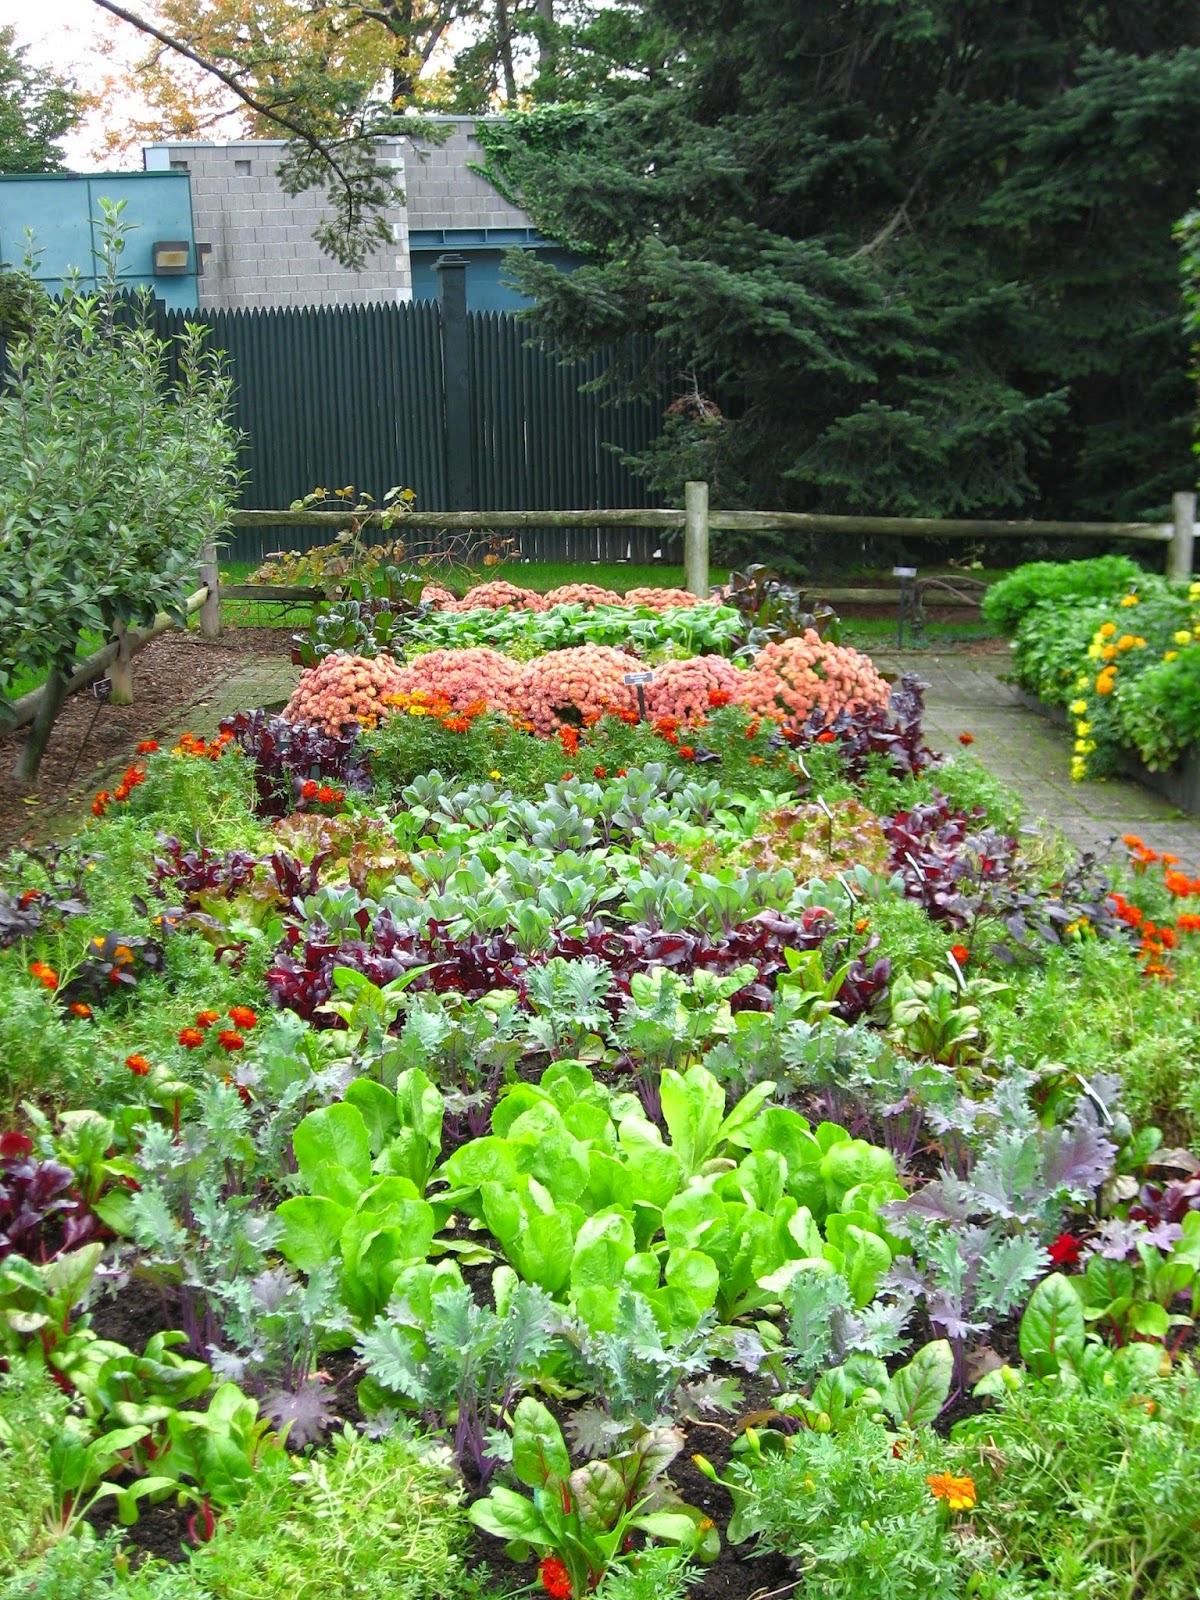 All About Women's Things: Vegetable Gardening - A Hobby for Everyone